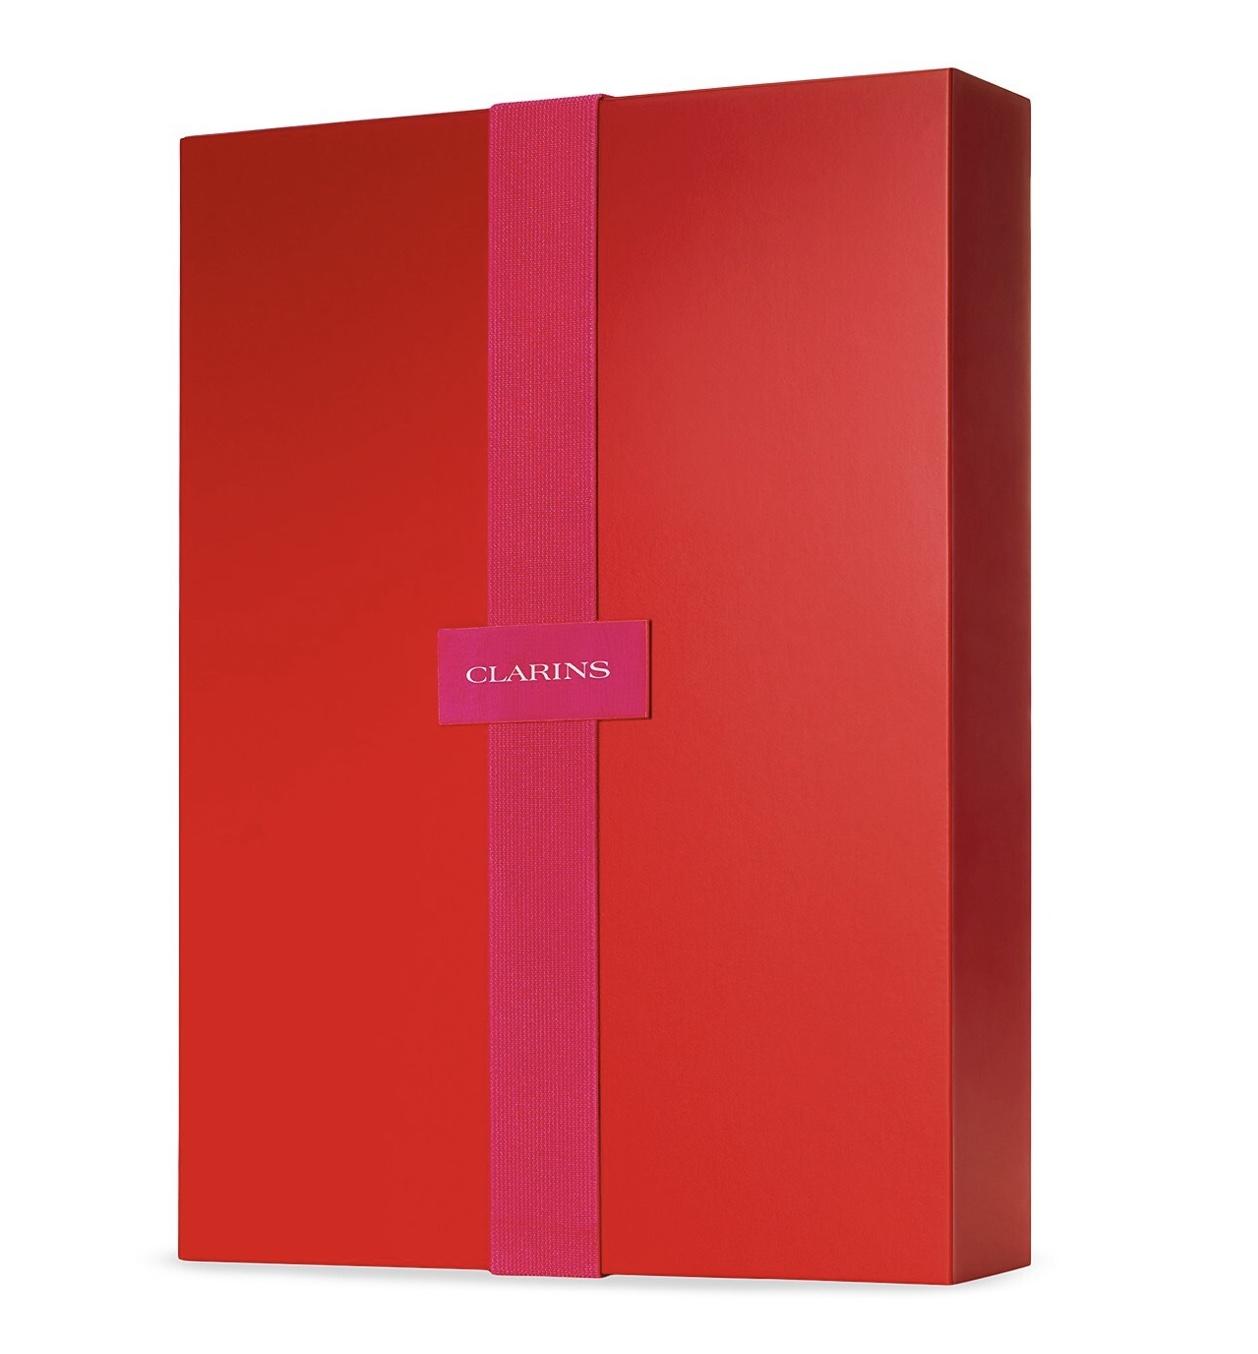 Clarins Holiday Sparkle Advent Calendar 12-Piece Makeup & Skin Care Set – Now Available